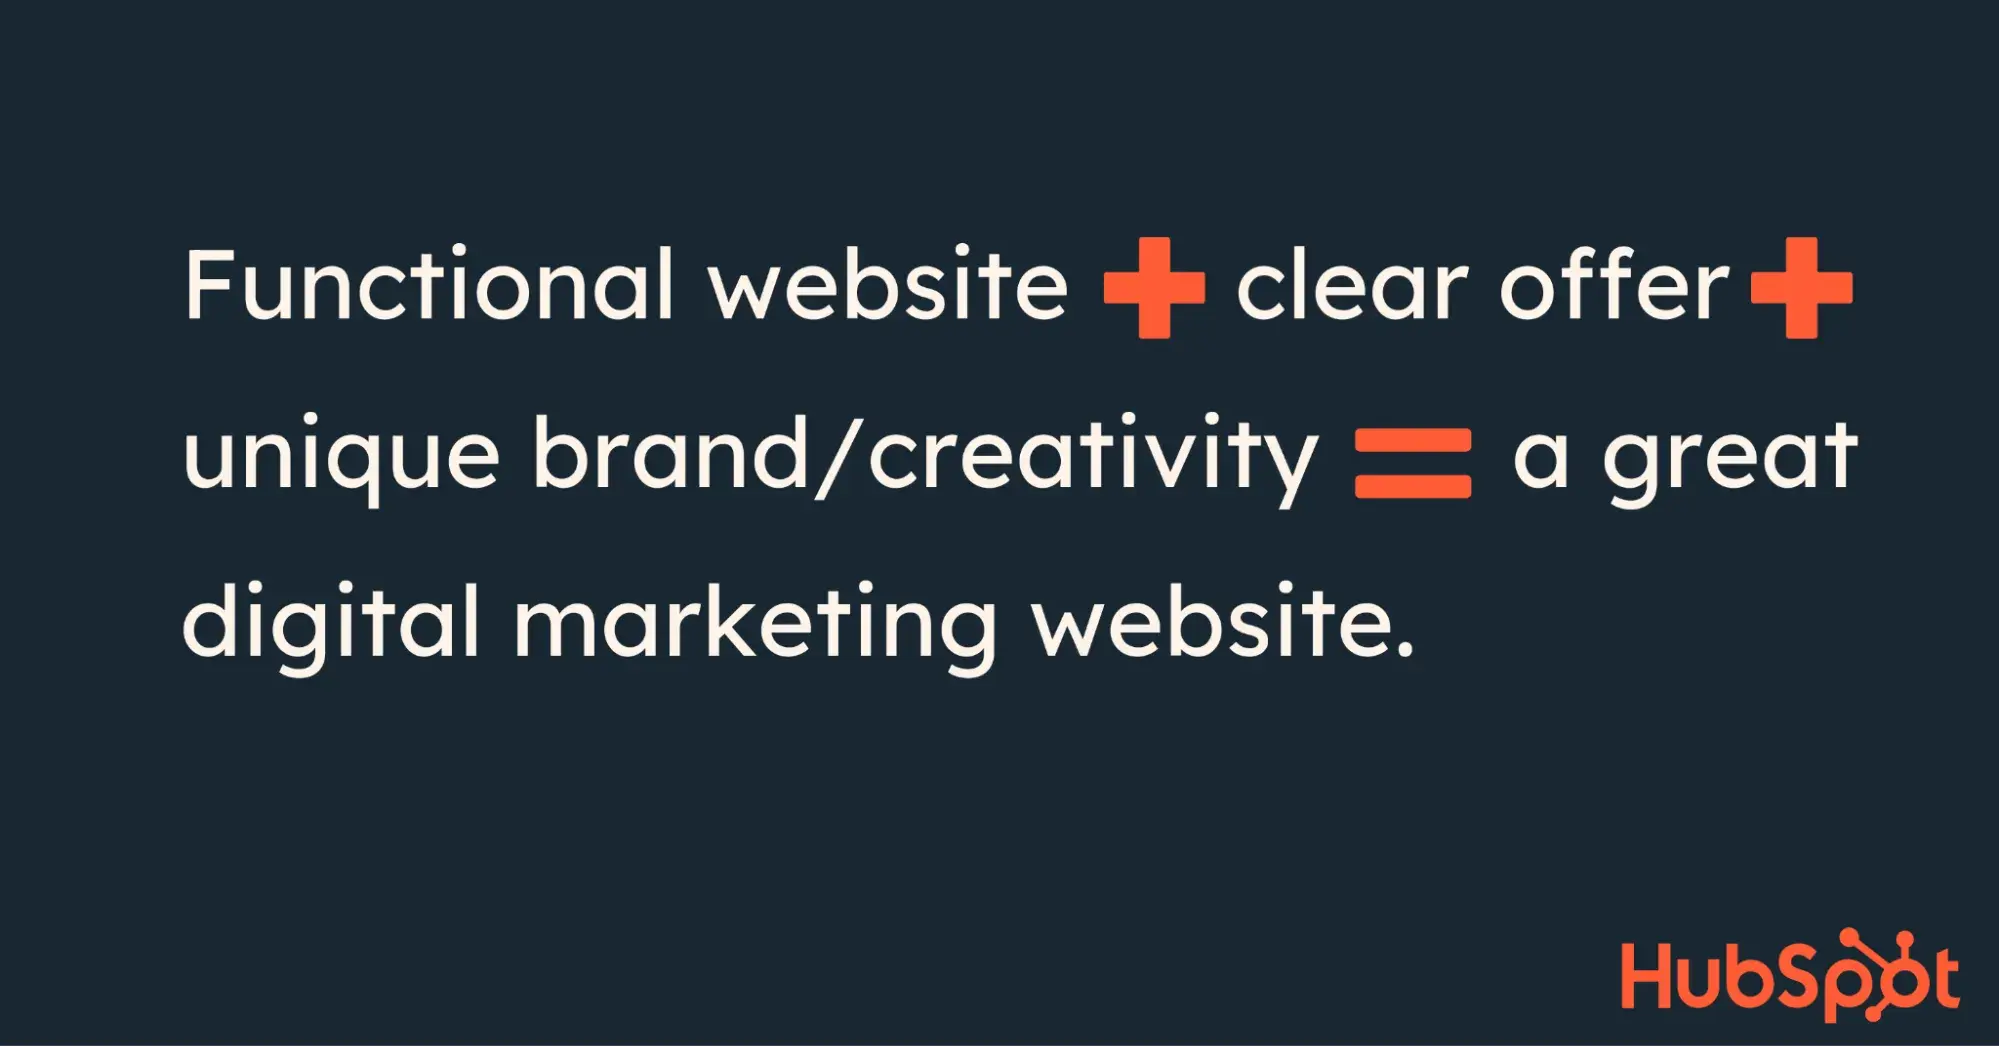 Quote from post on what makes a great digital marketing website